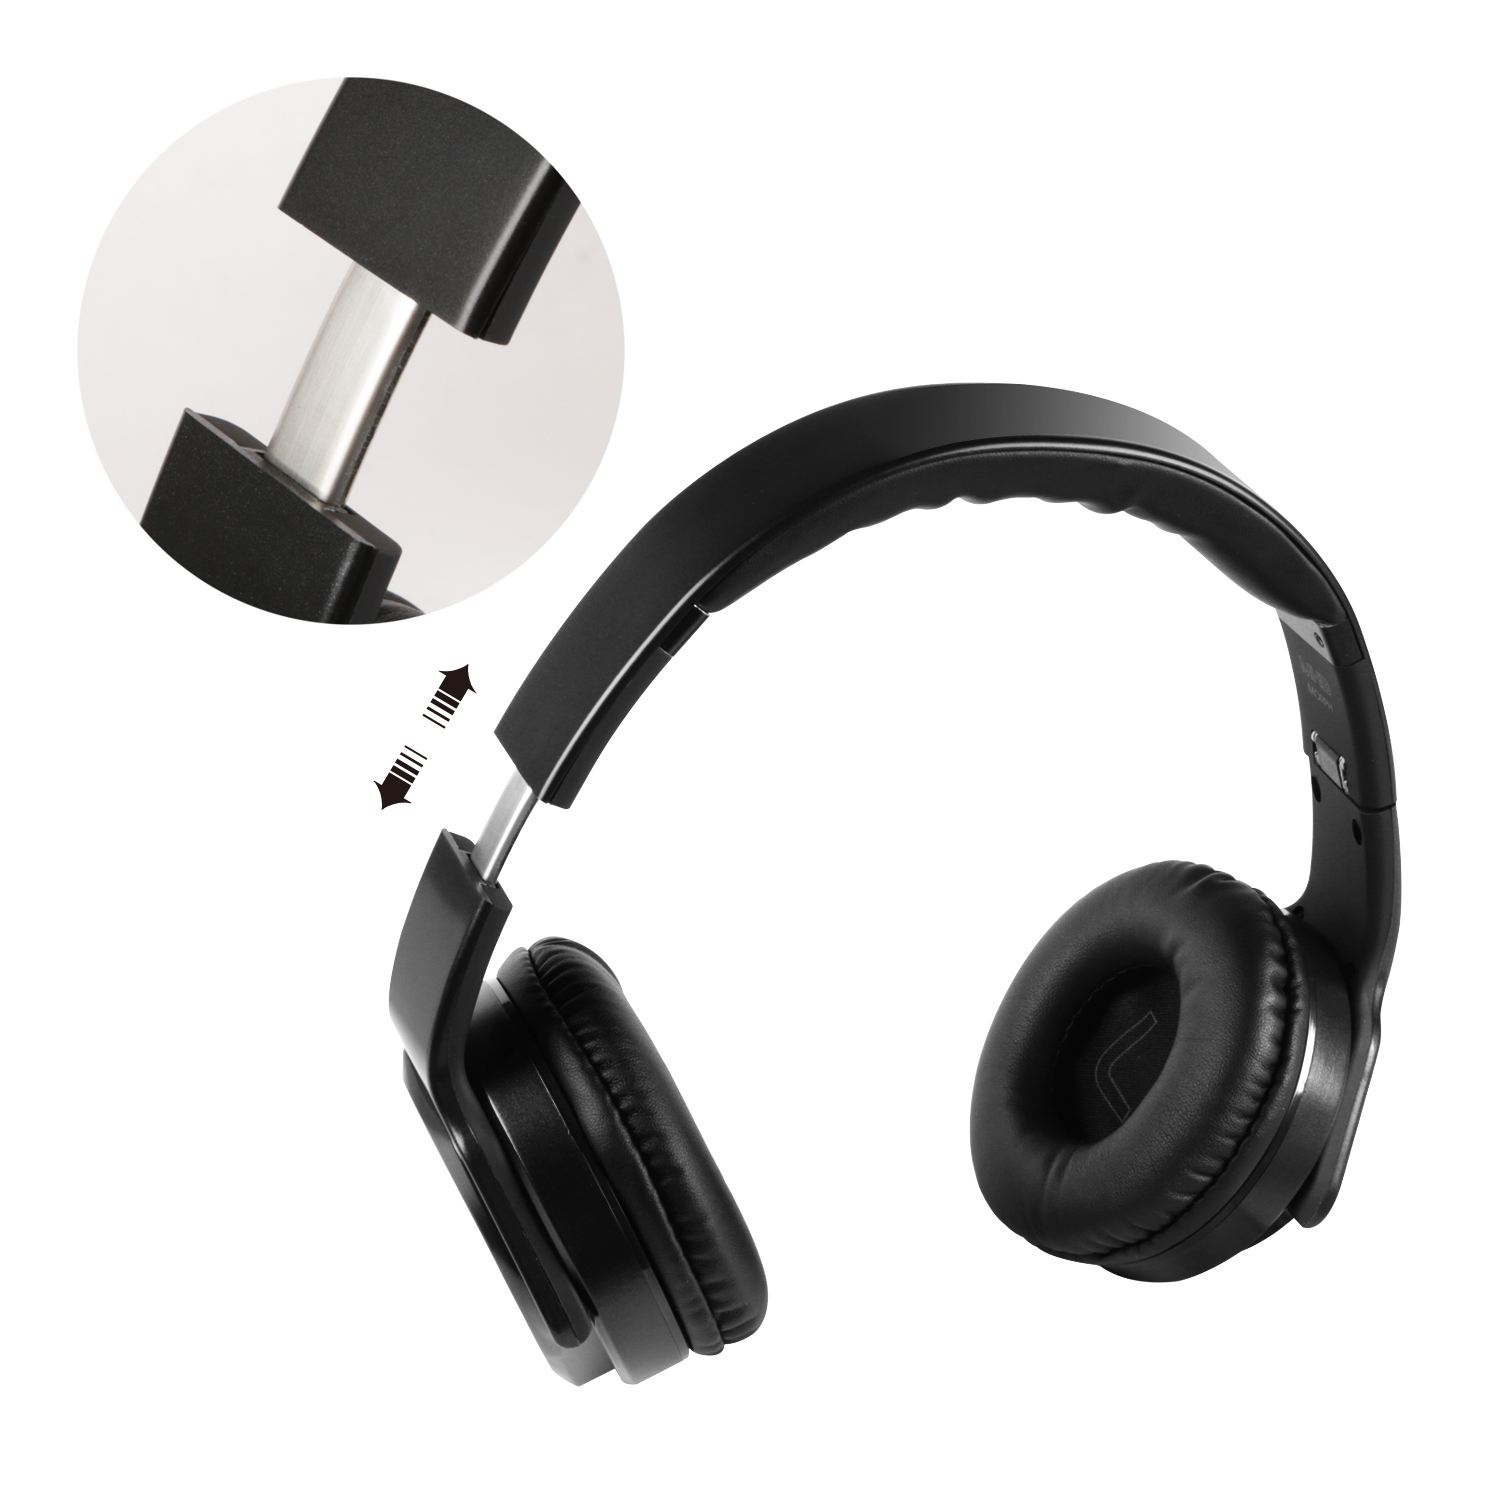 KOCASO HP-530 [Wireless / Foldable] Headphones With Built-in Speaker Mode - image 4 of 9